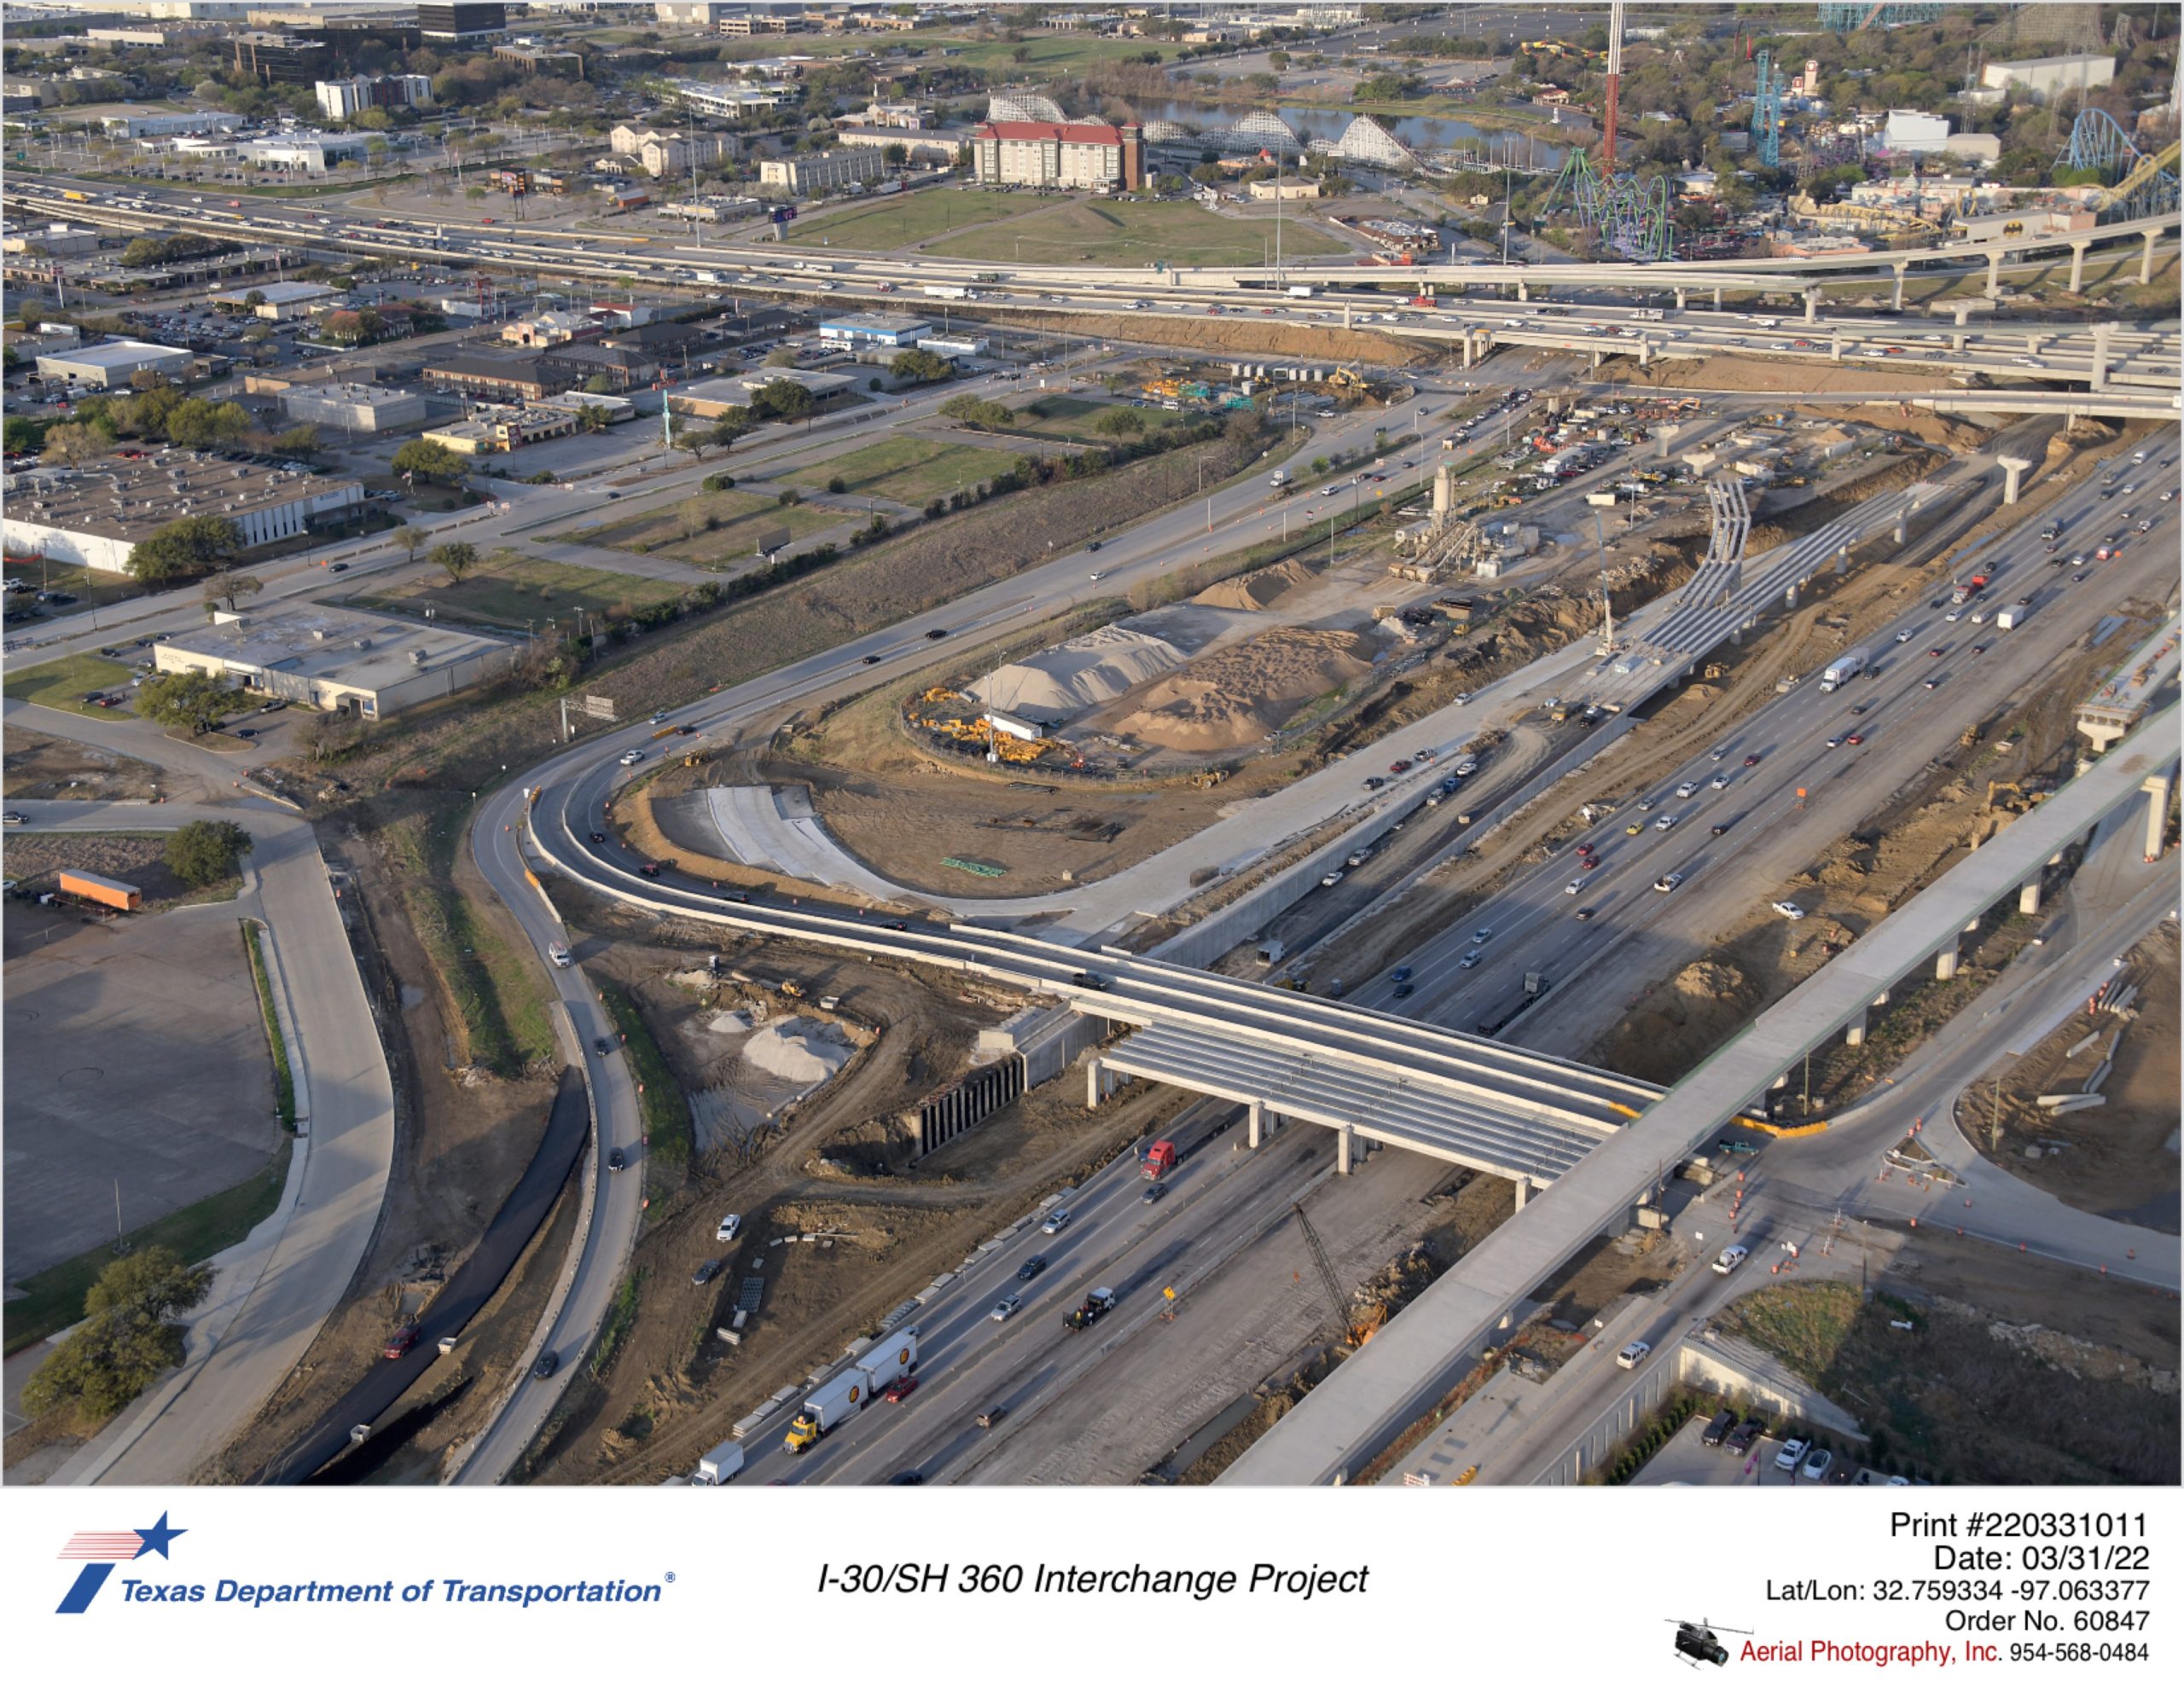 I-30/Six Flags Dr interchange looking southeast. Progress shown for Six Flags Dr bridge construction on east side and eastbound frontage road construction up to Six Flags Dr.